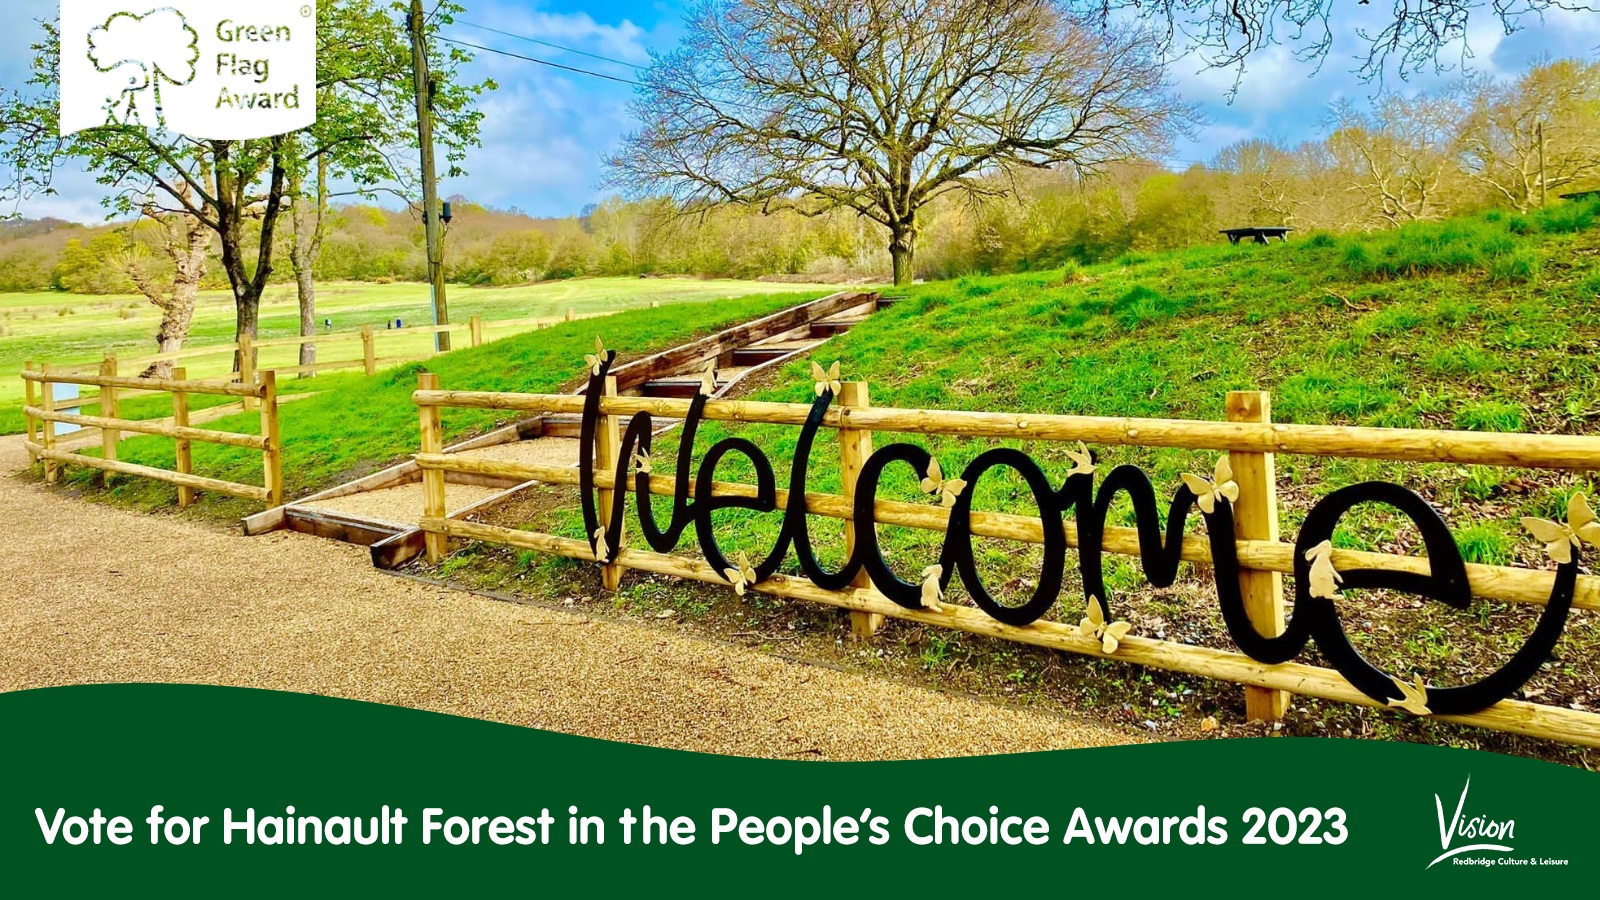 Hainault Forest Welcome sign, Green flag award logo, Text: Vote for Hainault Forest in the People's Choice Awards 2023